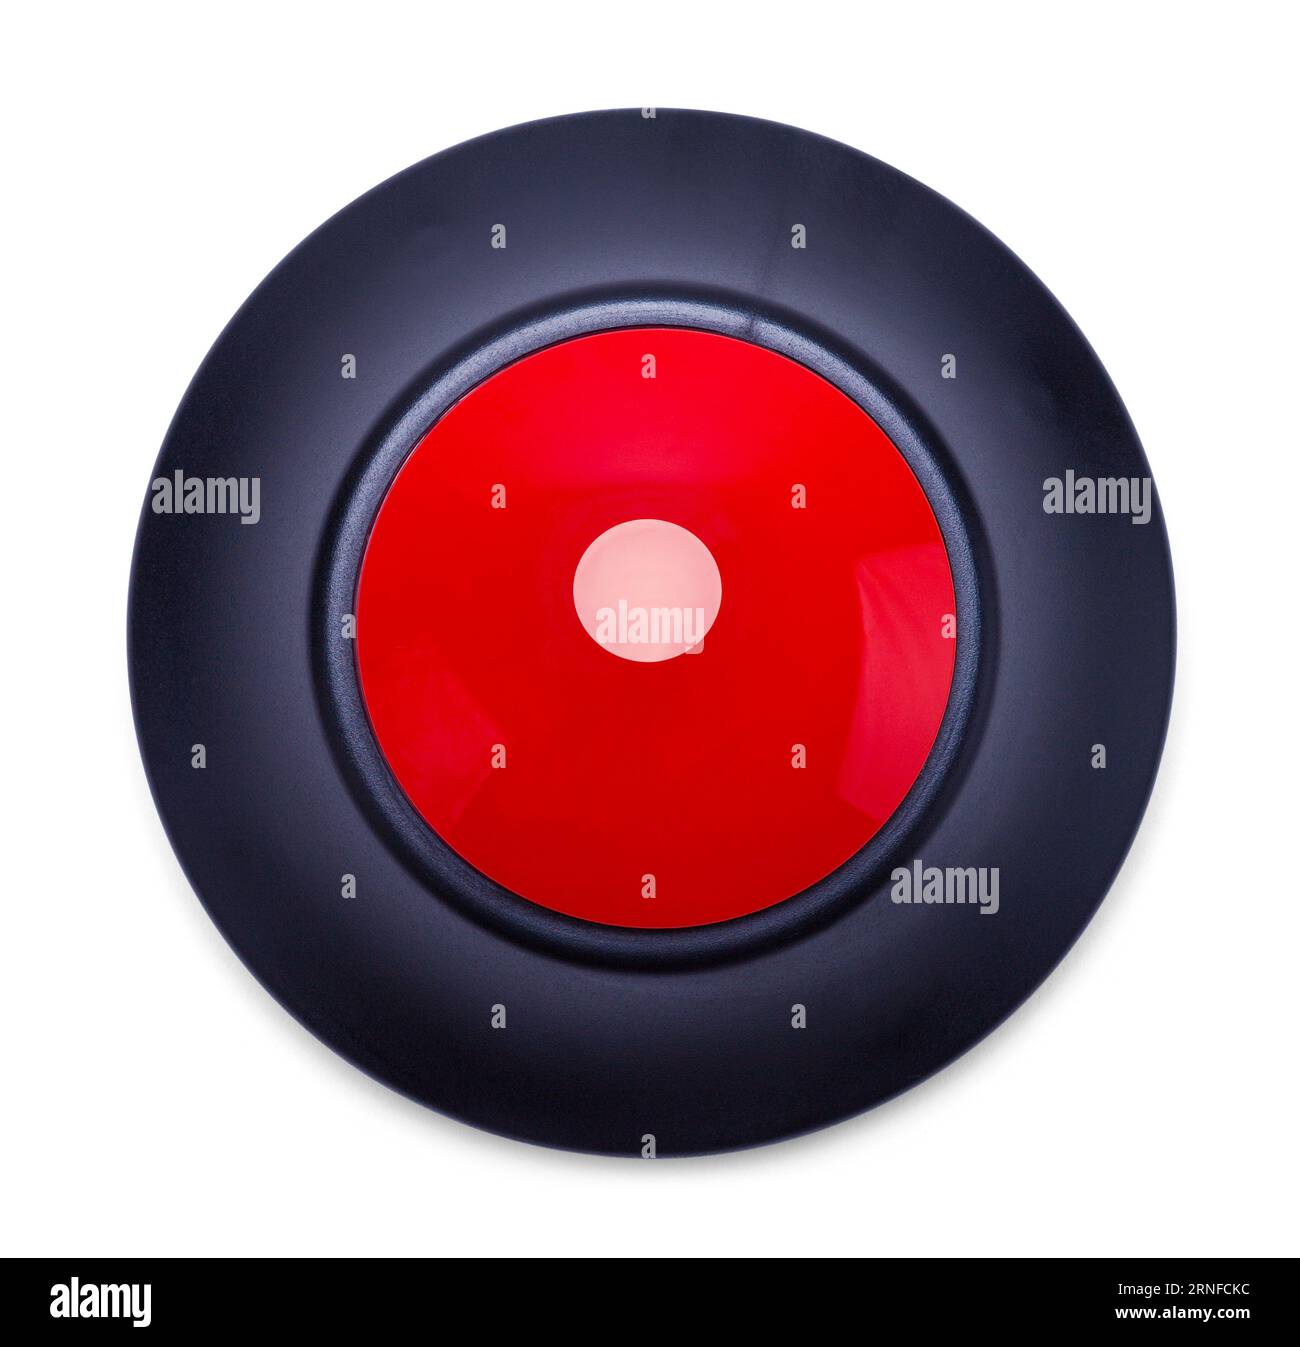 Red and Black Push Button Top View Cut Out. Stock Photo